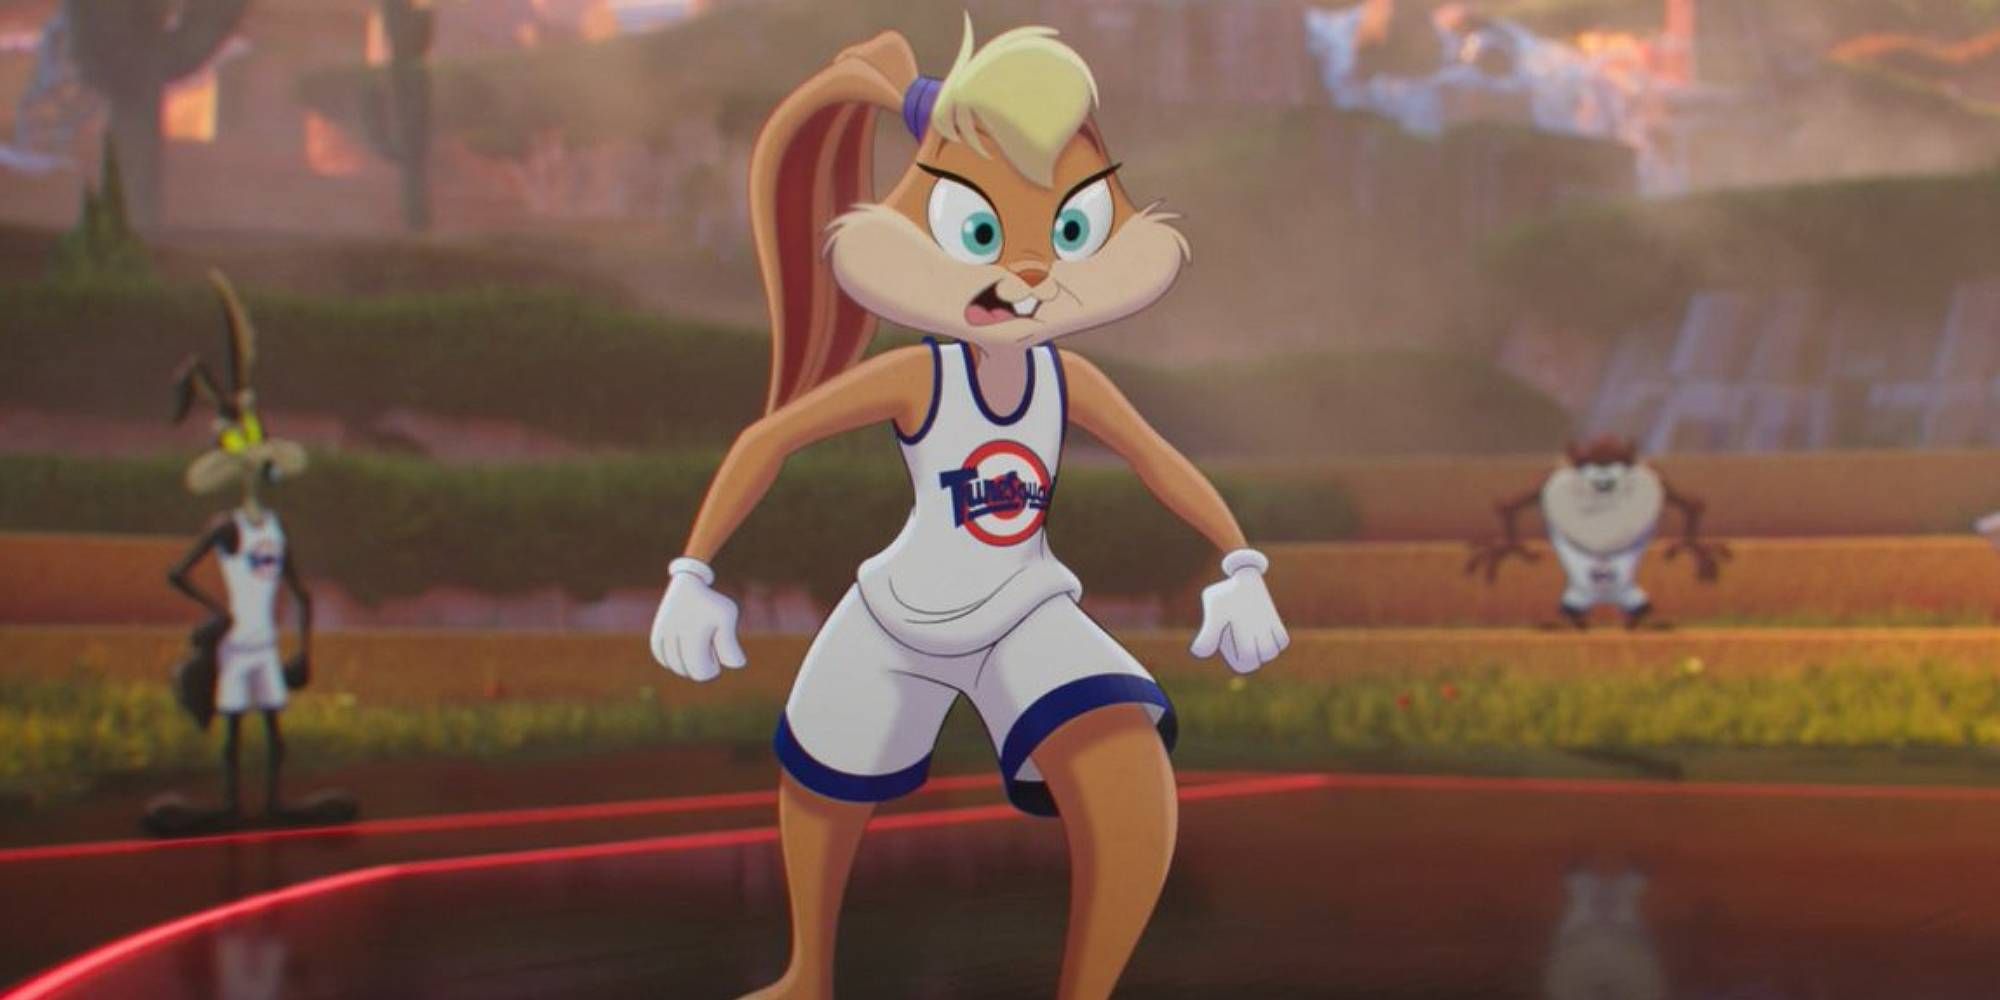 Lola Bunny in Space Jam A New Legacy standing in a basketball court.